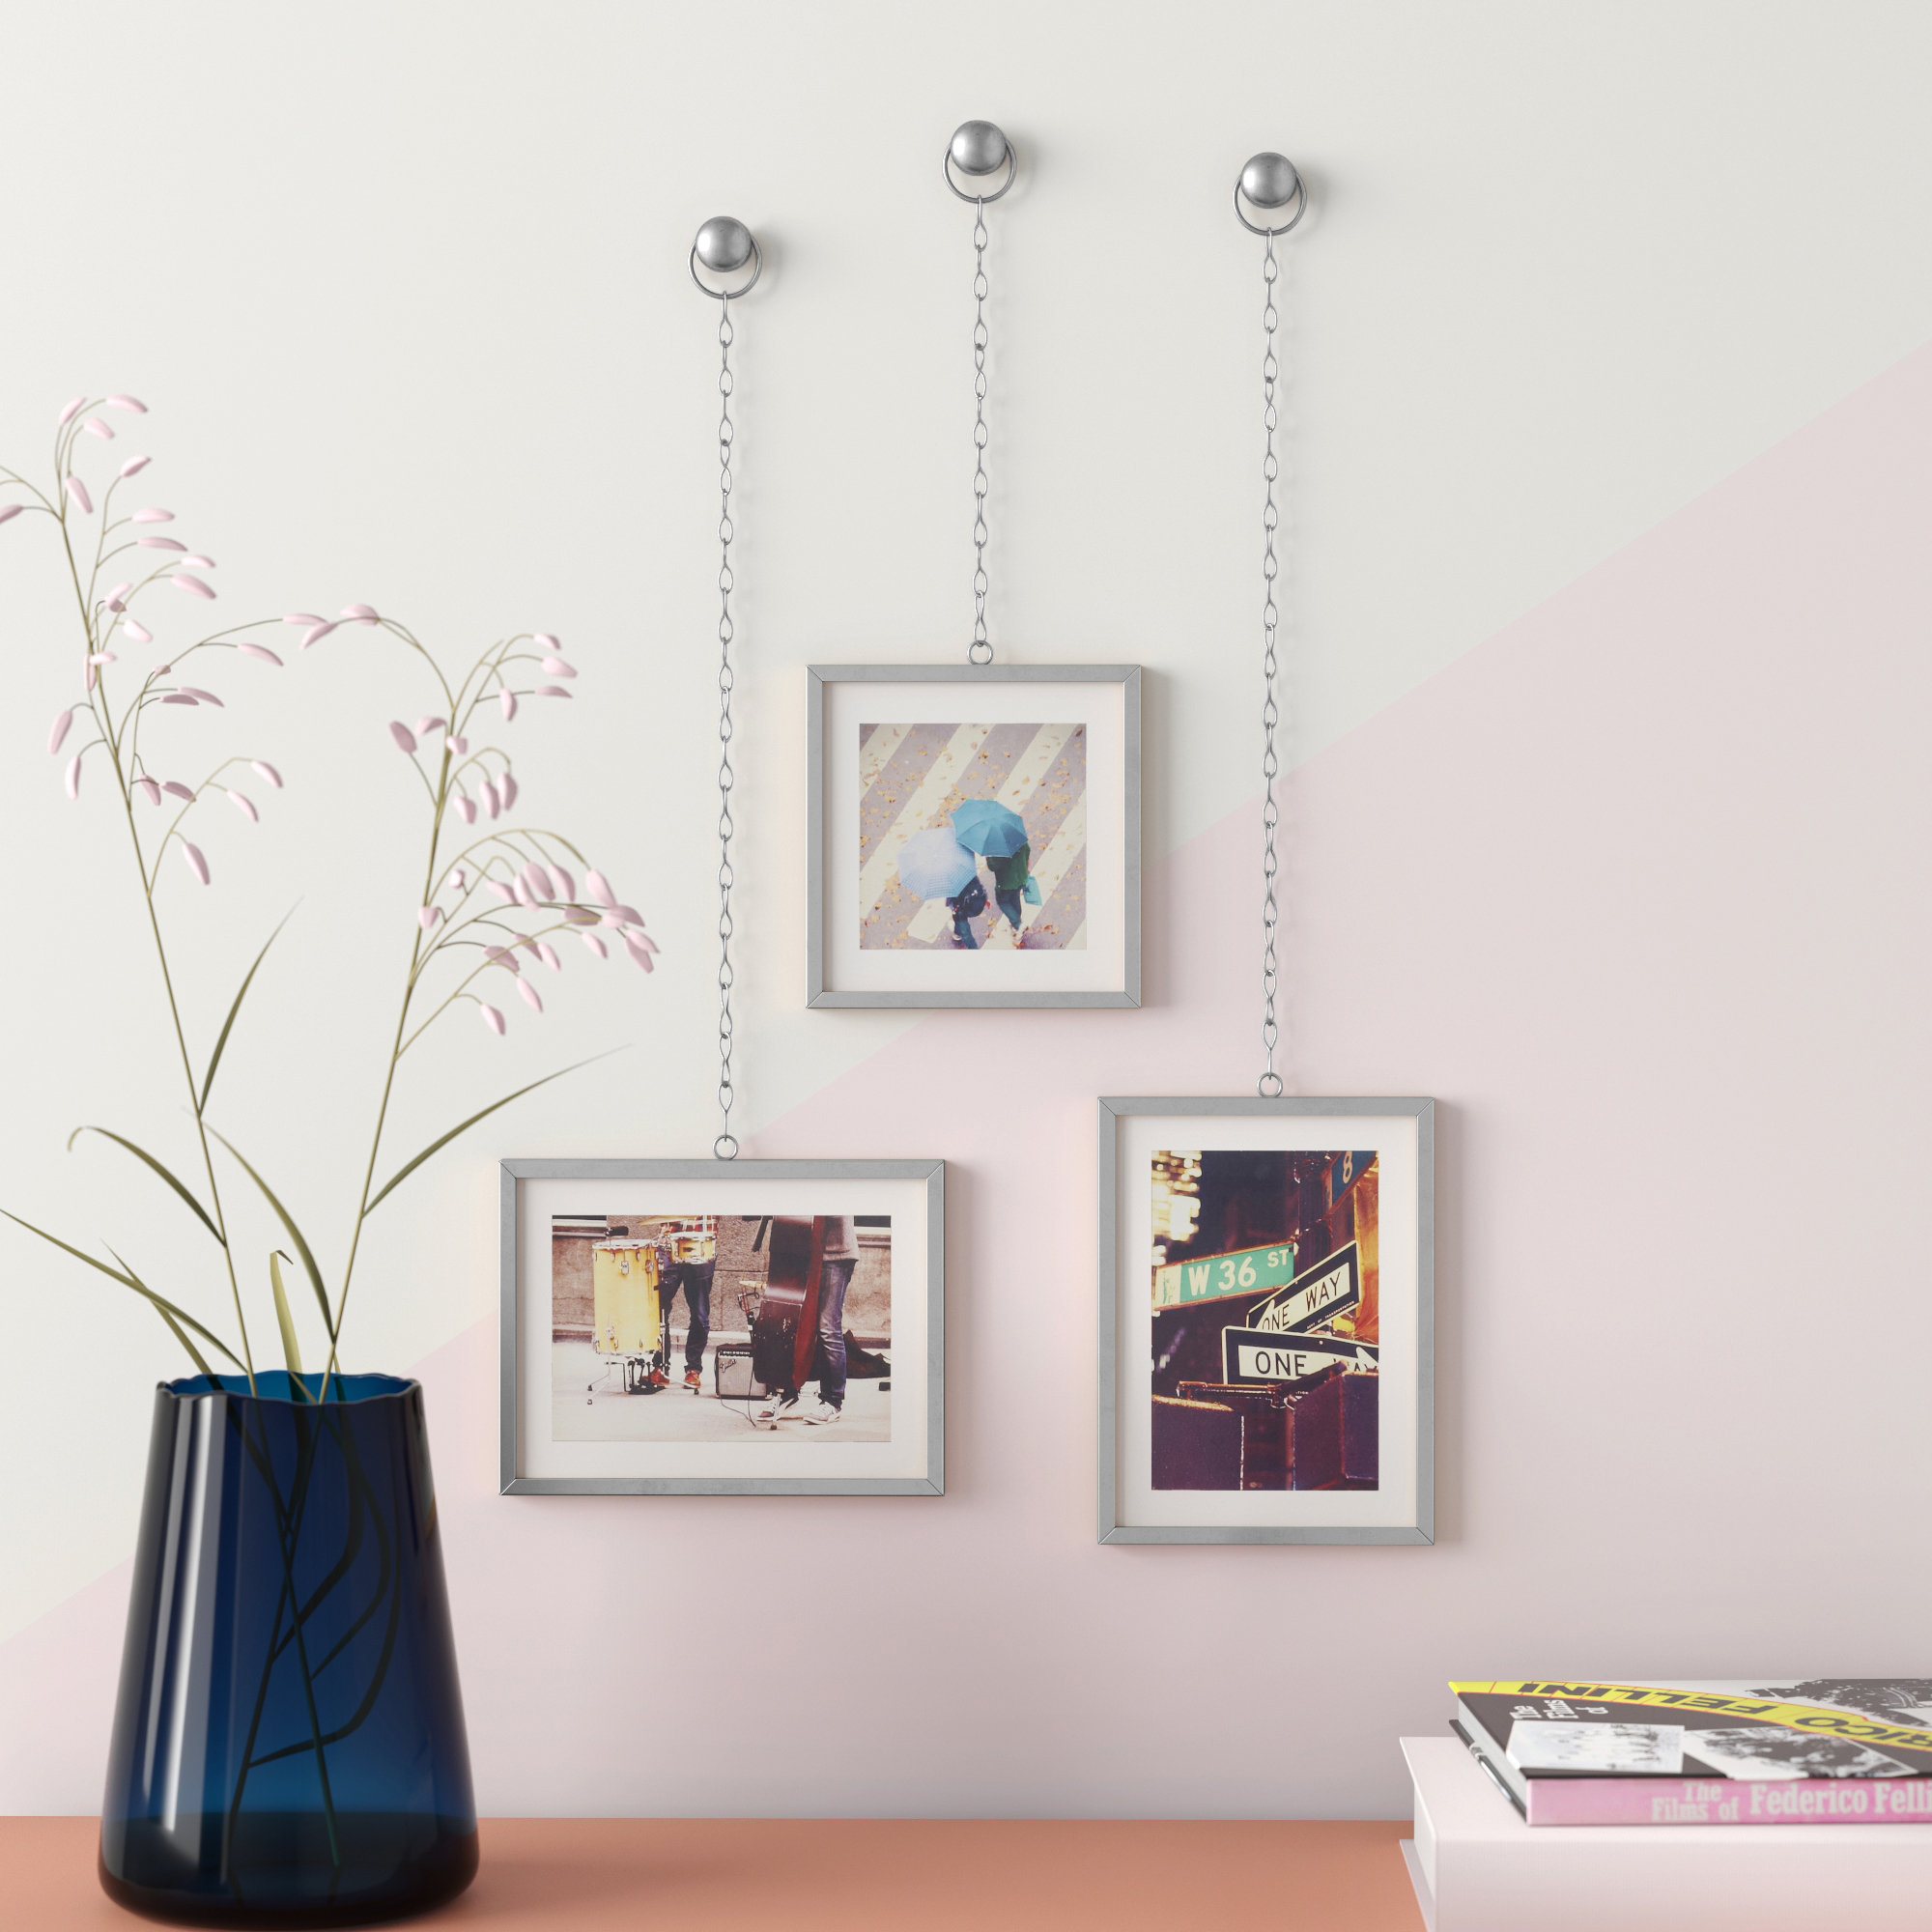 Umbra Fotochain Gallery Wall Picture Frame, Set of 3 